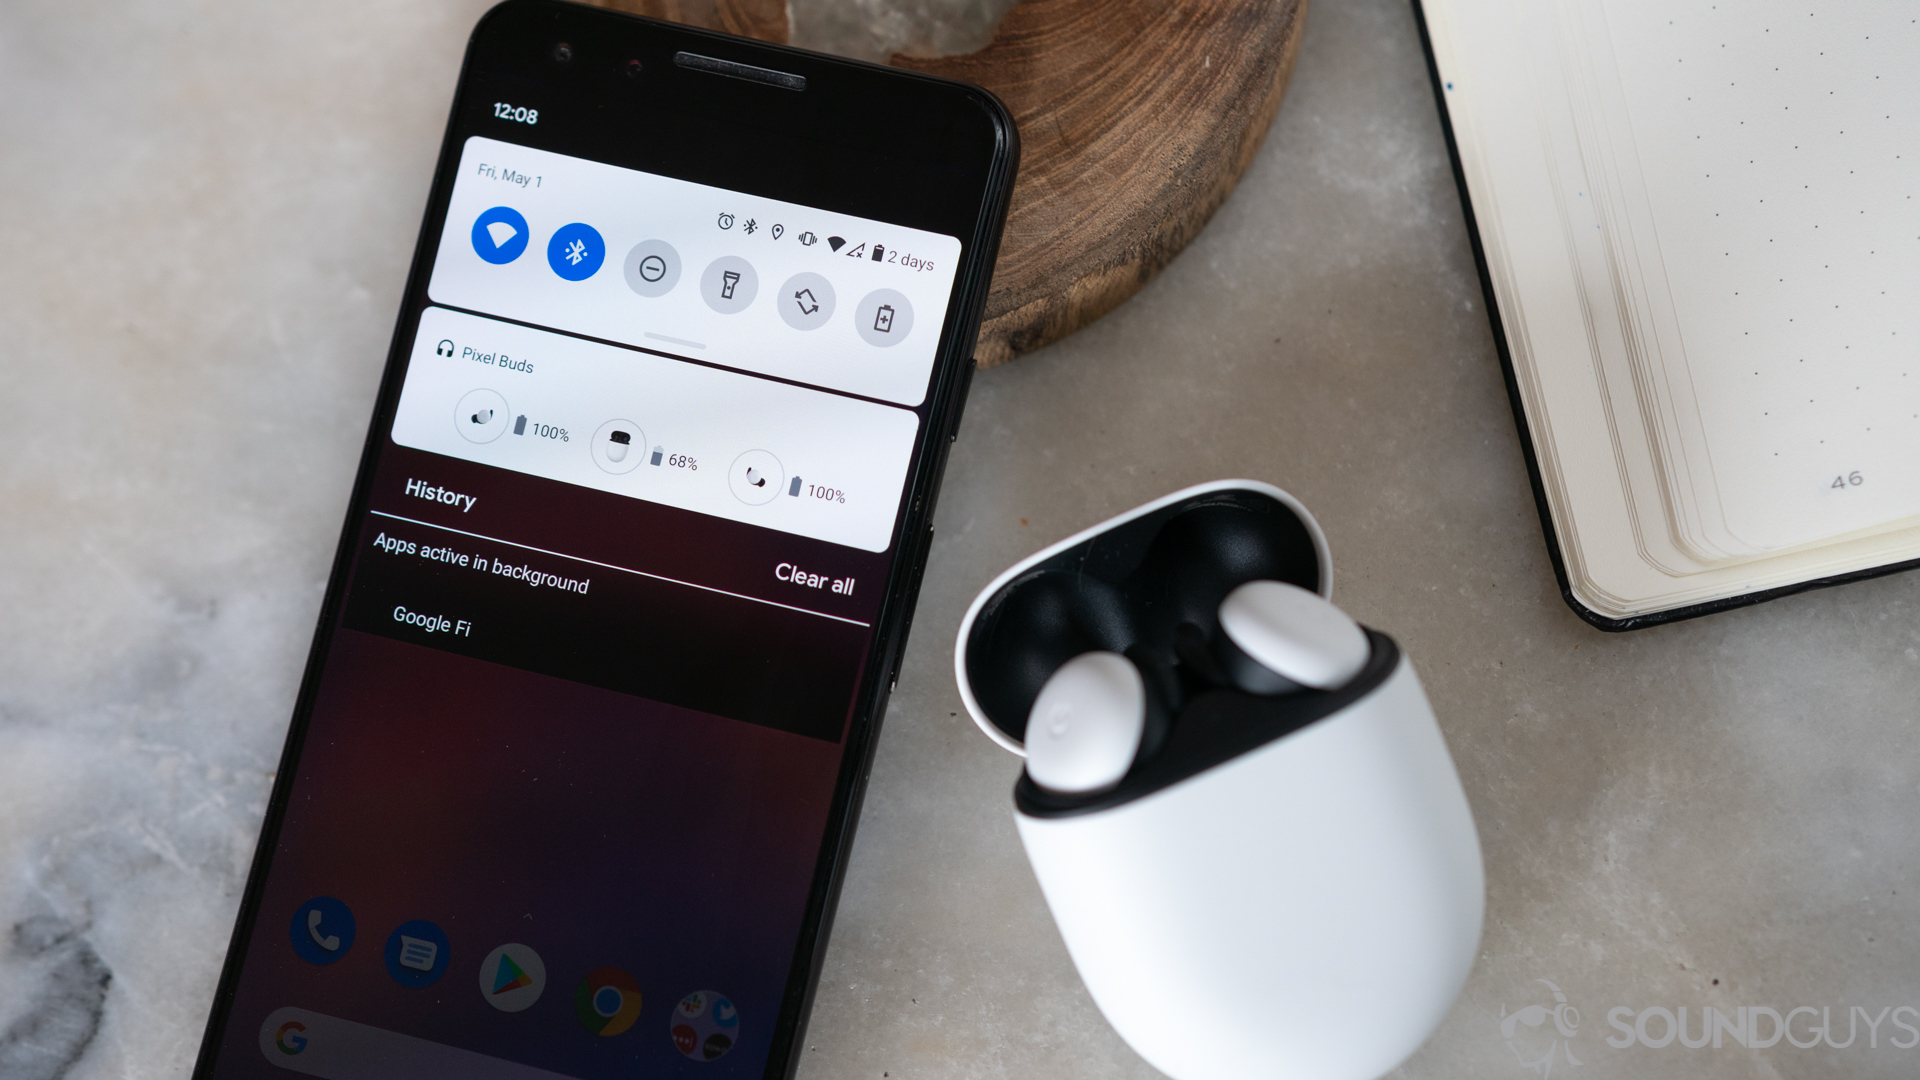 The Google Pixel Buds 2020 True Wireless earbud case is open and a Bluetooth dropdown menu appears next to a Pixel smartphone.